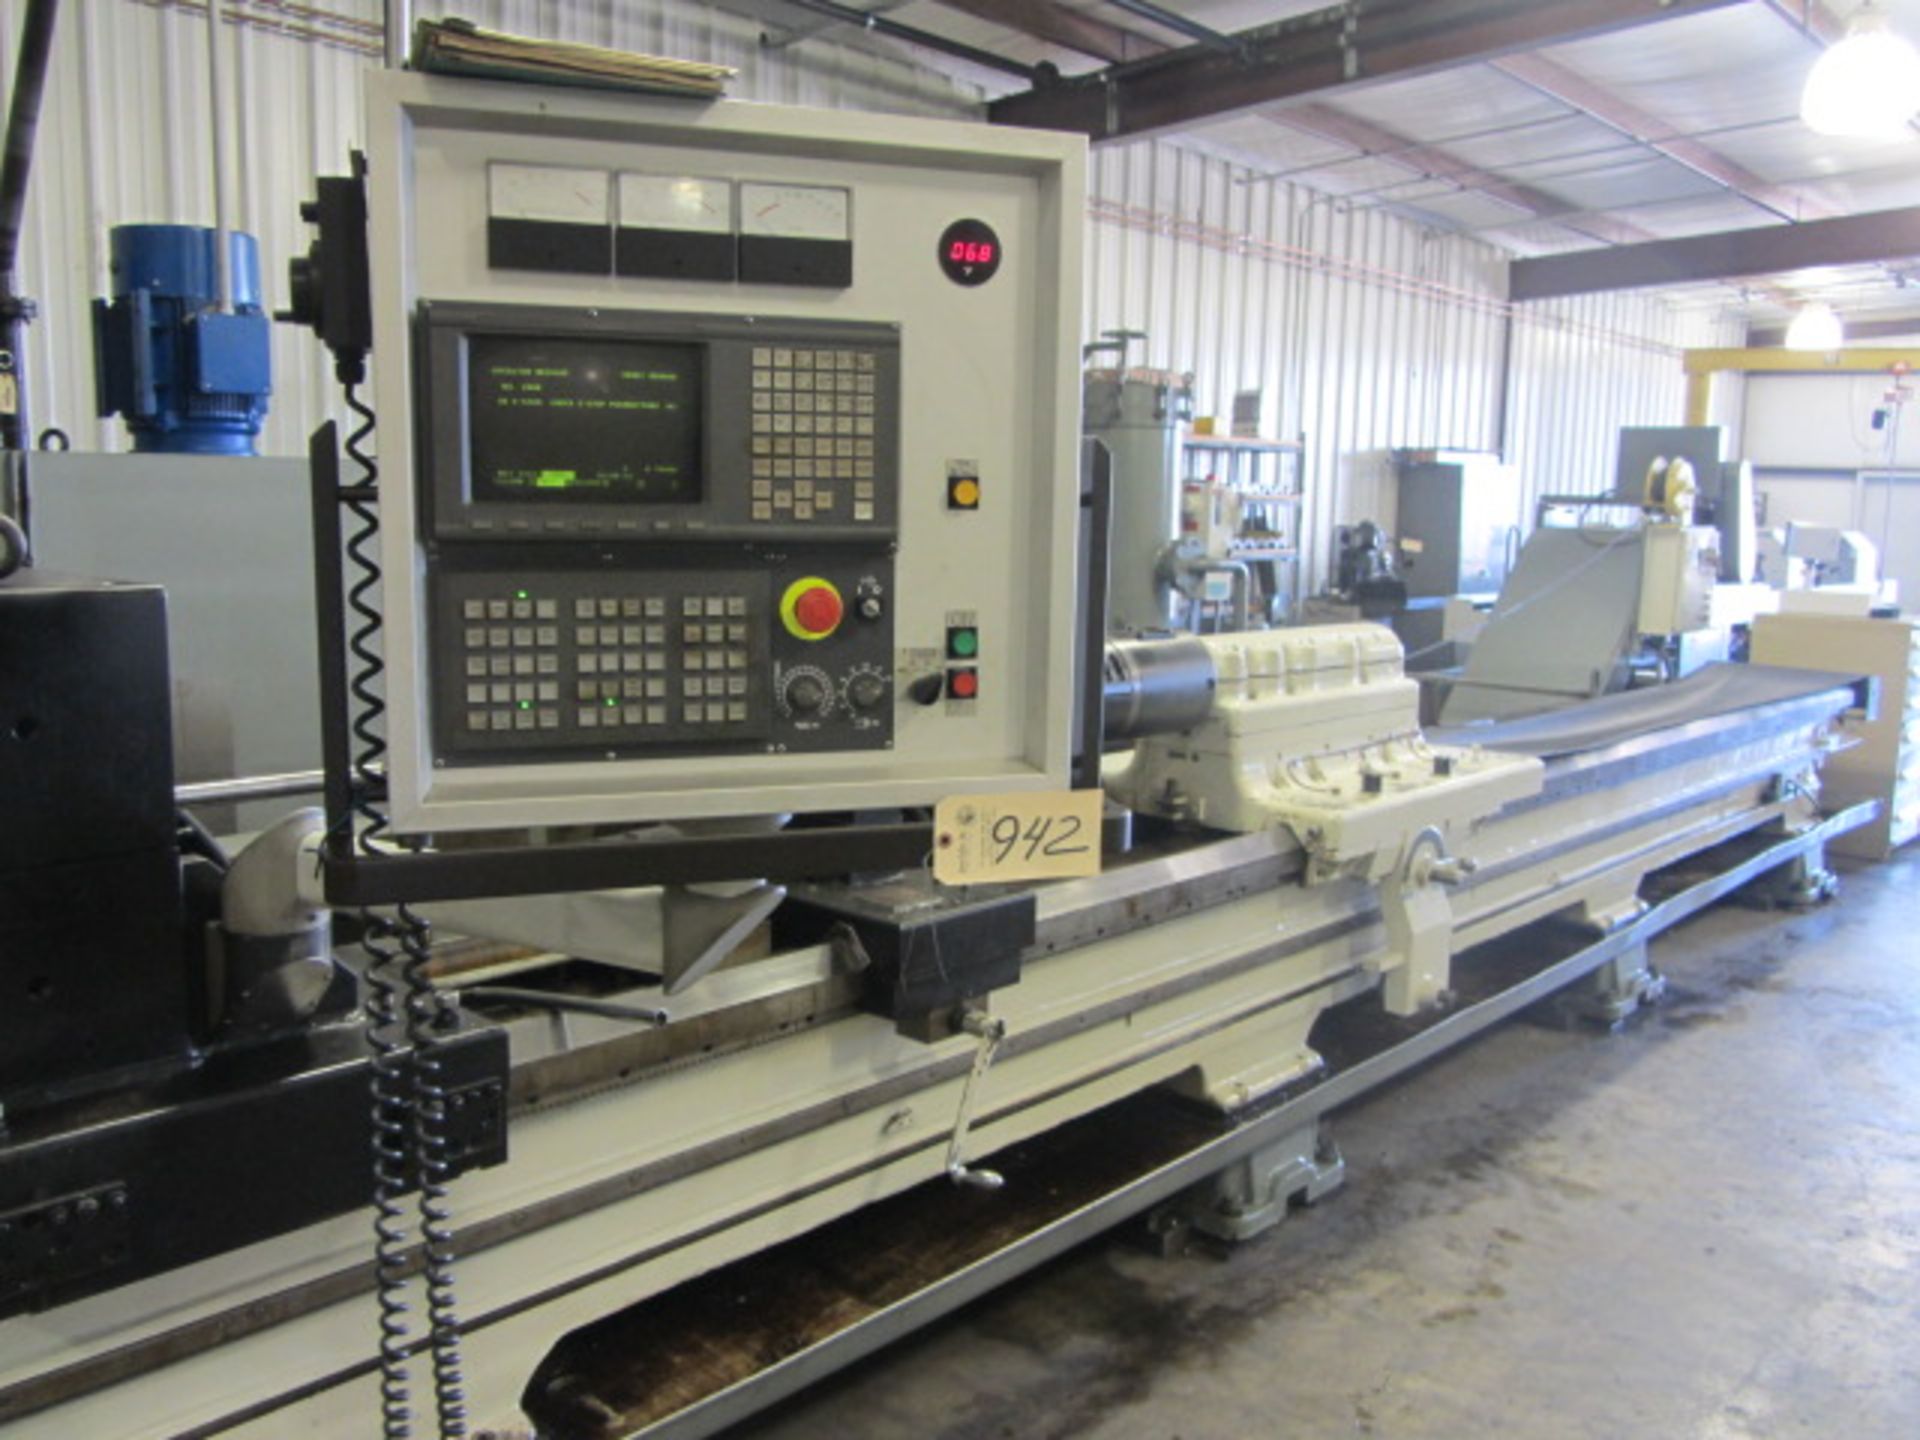 Sig/Axelson CNC Deep Hole / Trepanning / Ejector Drilling Machine with up to 27' Maximum Bed Length, - Image 10 of 10